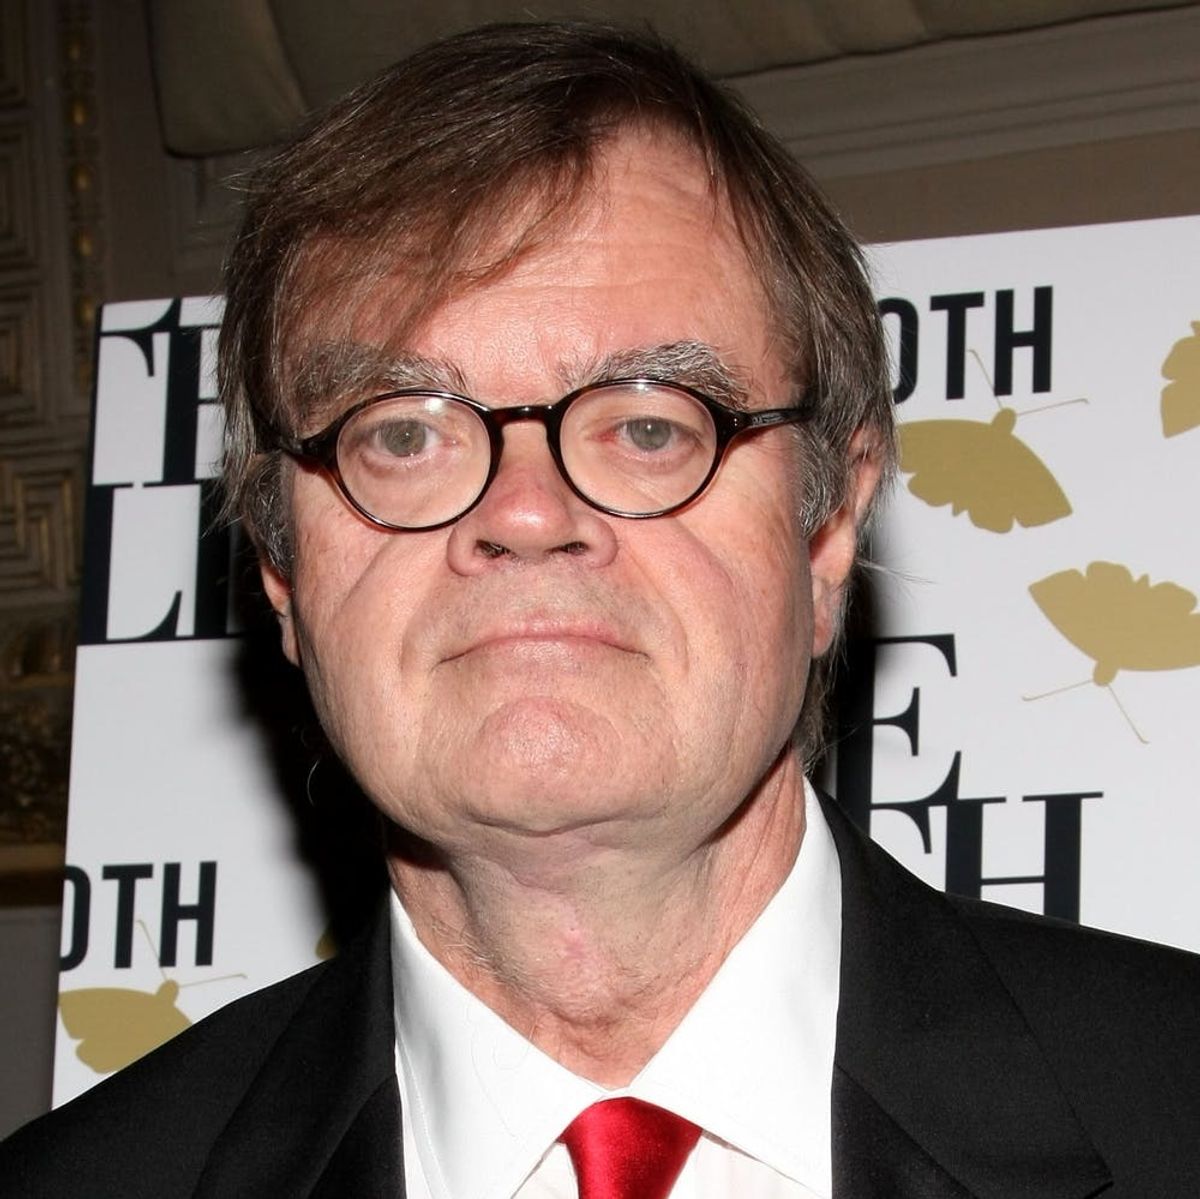 Here’s the Latest on the Allegations Against ‘Prairie Home Companion’ Host Garrison Keillor